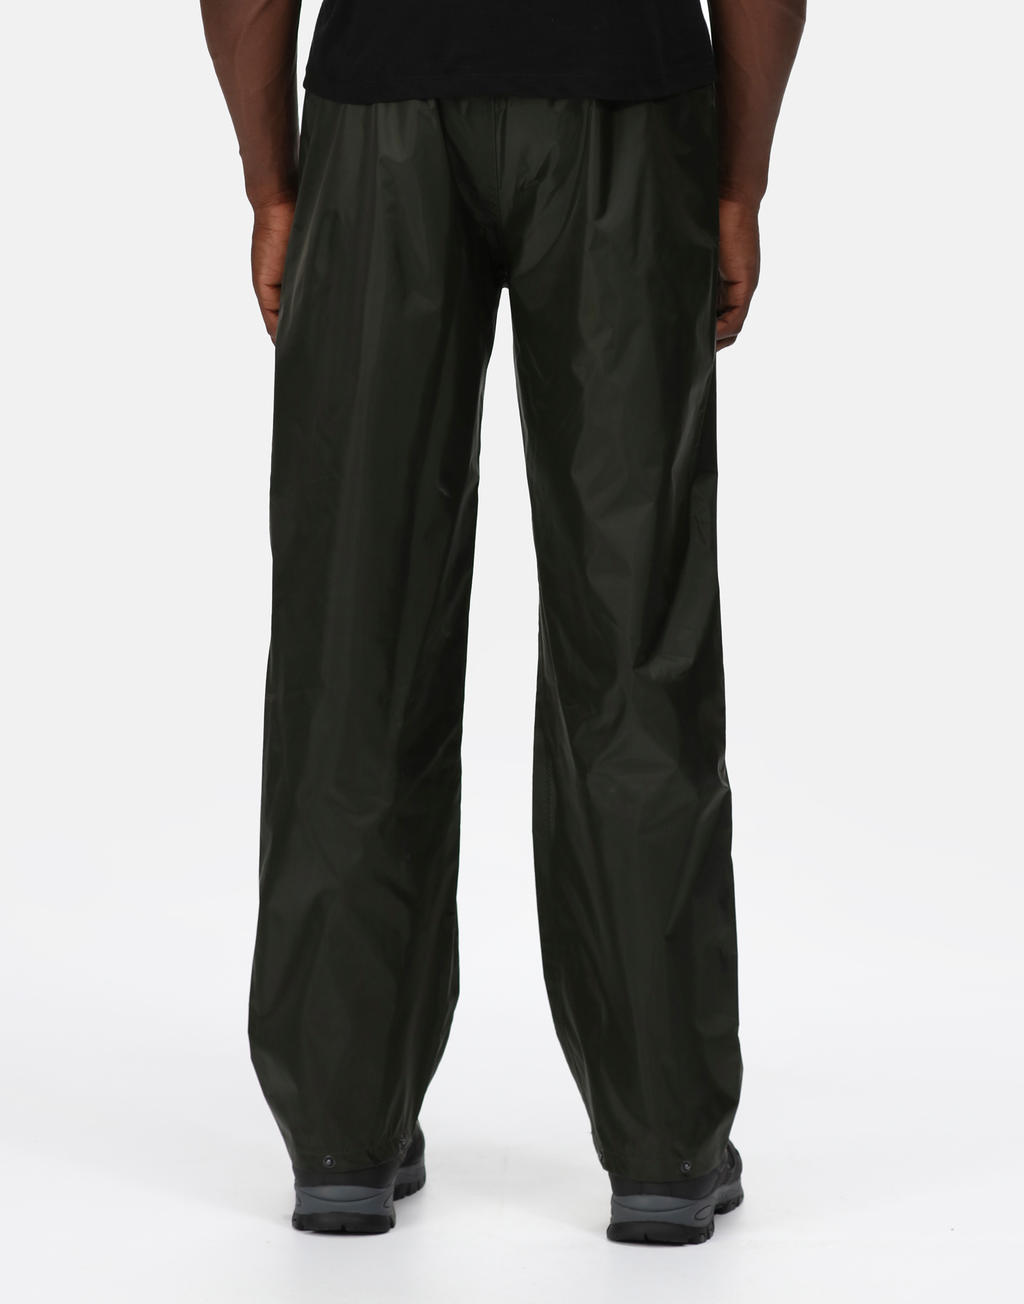  Stormbreak Overtrousers in Farbe Black